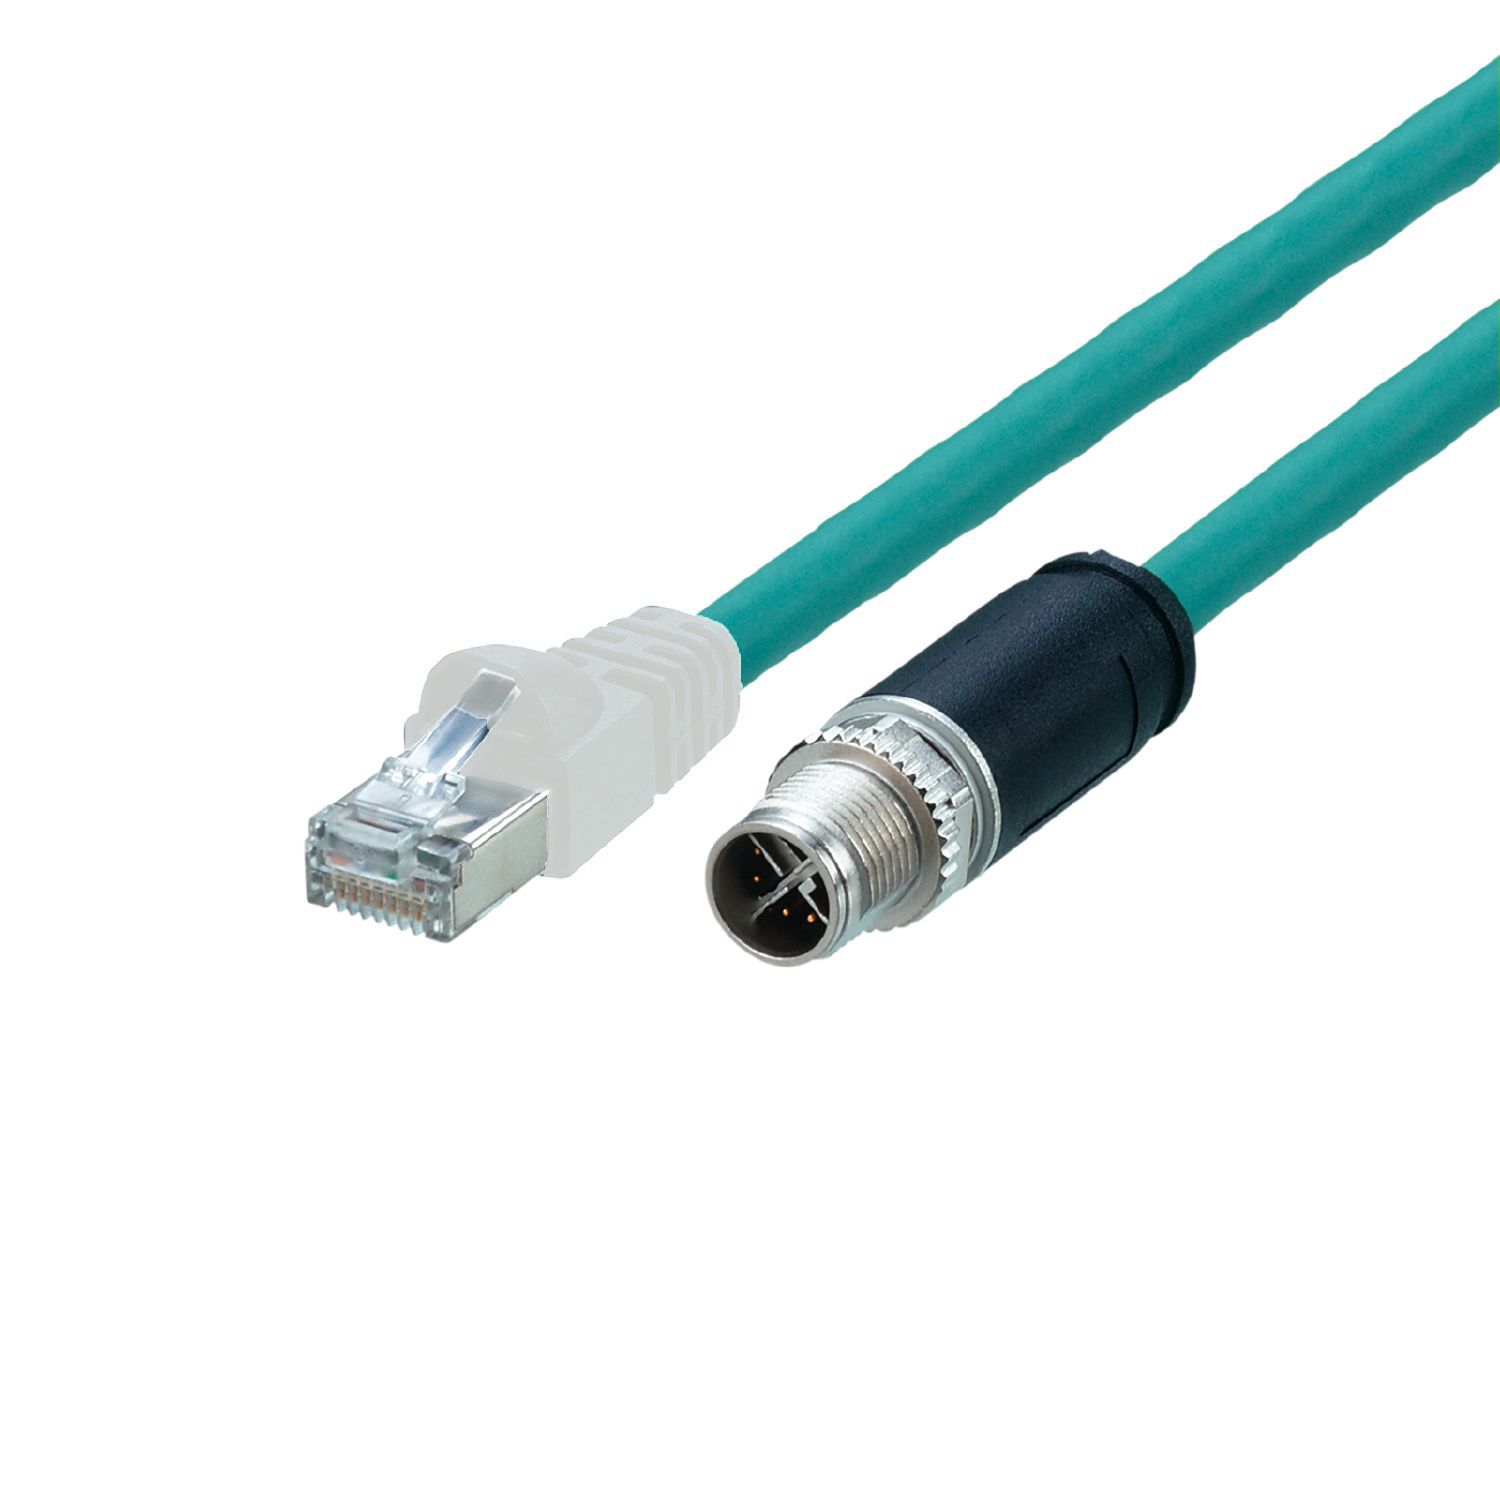 ZH4114 - Connection cable - ifm